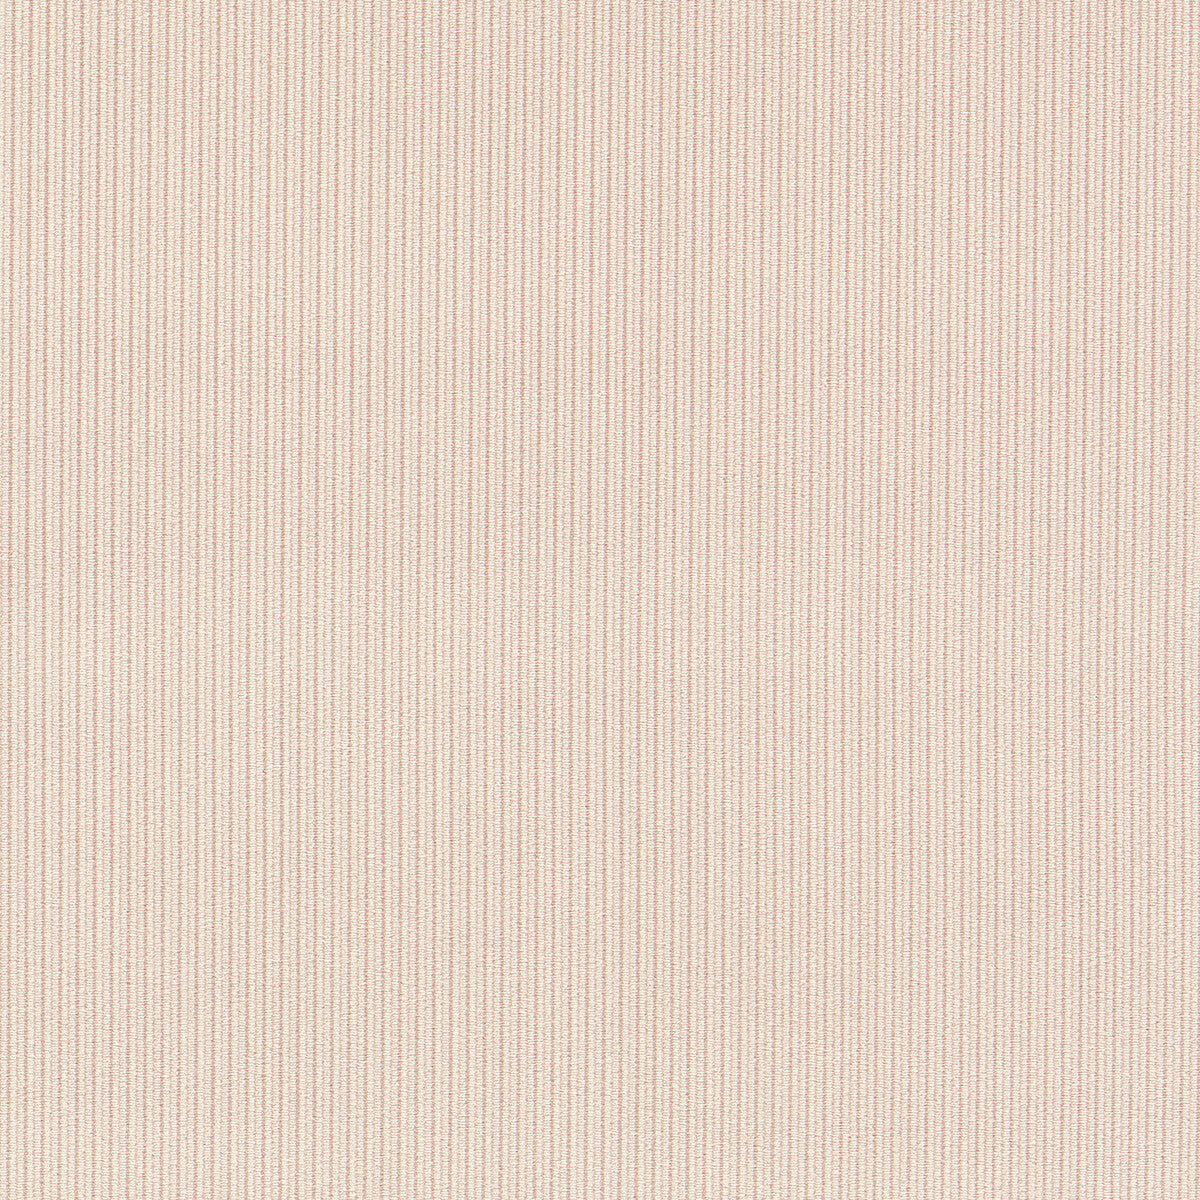 Ashdown fabric in blush color - pattern F1688/02.CAC.0 - by Clarke And Clarke in the Whitworth collection